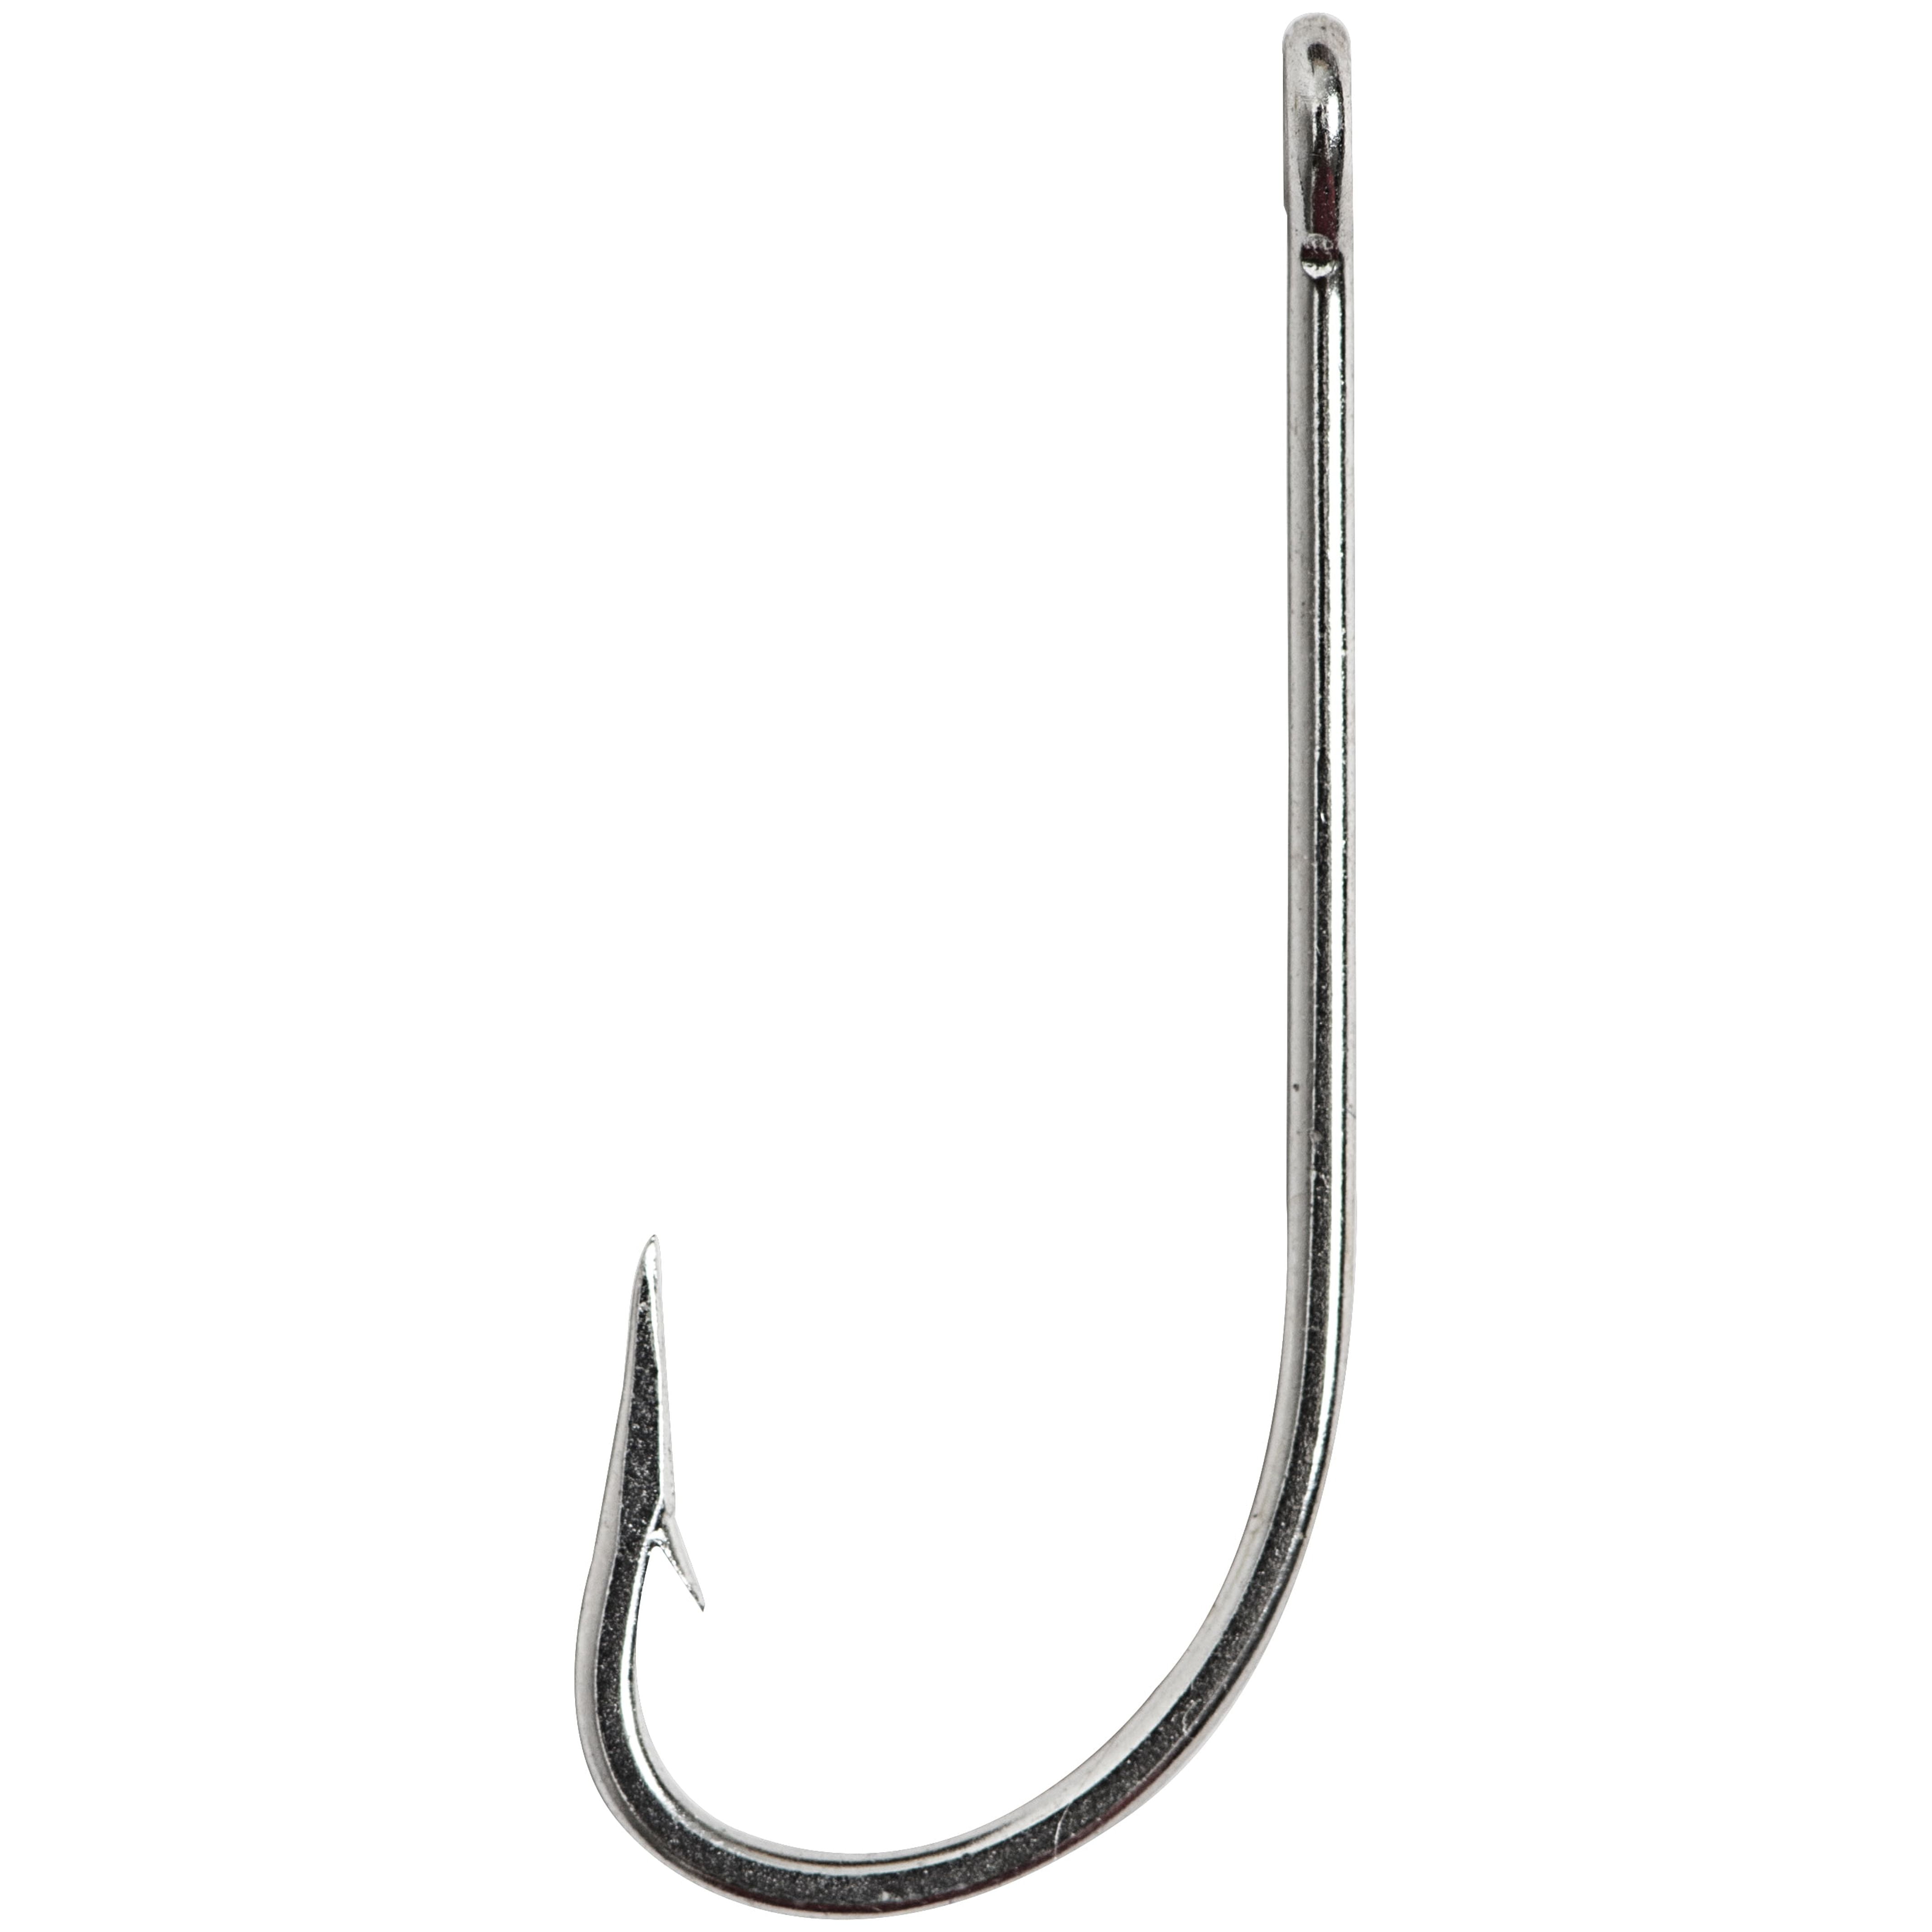 50 Mustad 1/0 O'Shaughnessy Fishing Lure Bait Hooks Duratin 3407 DT Snapper